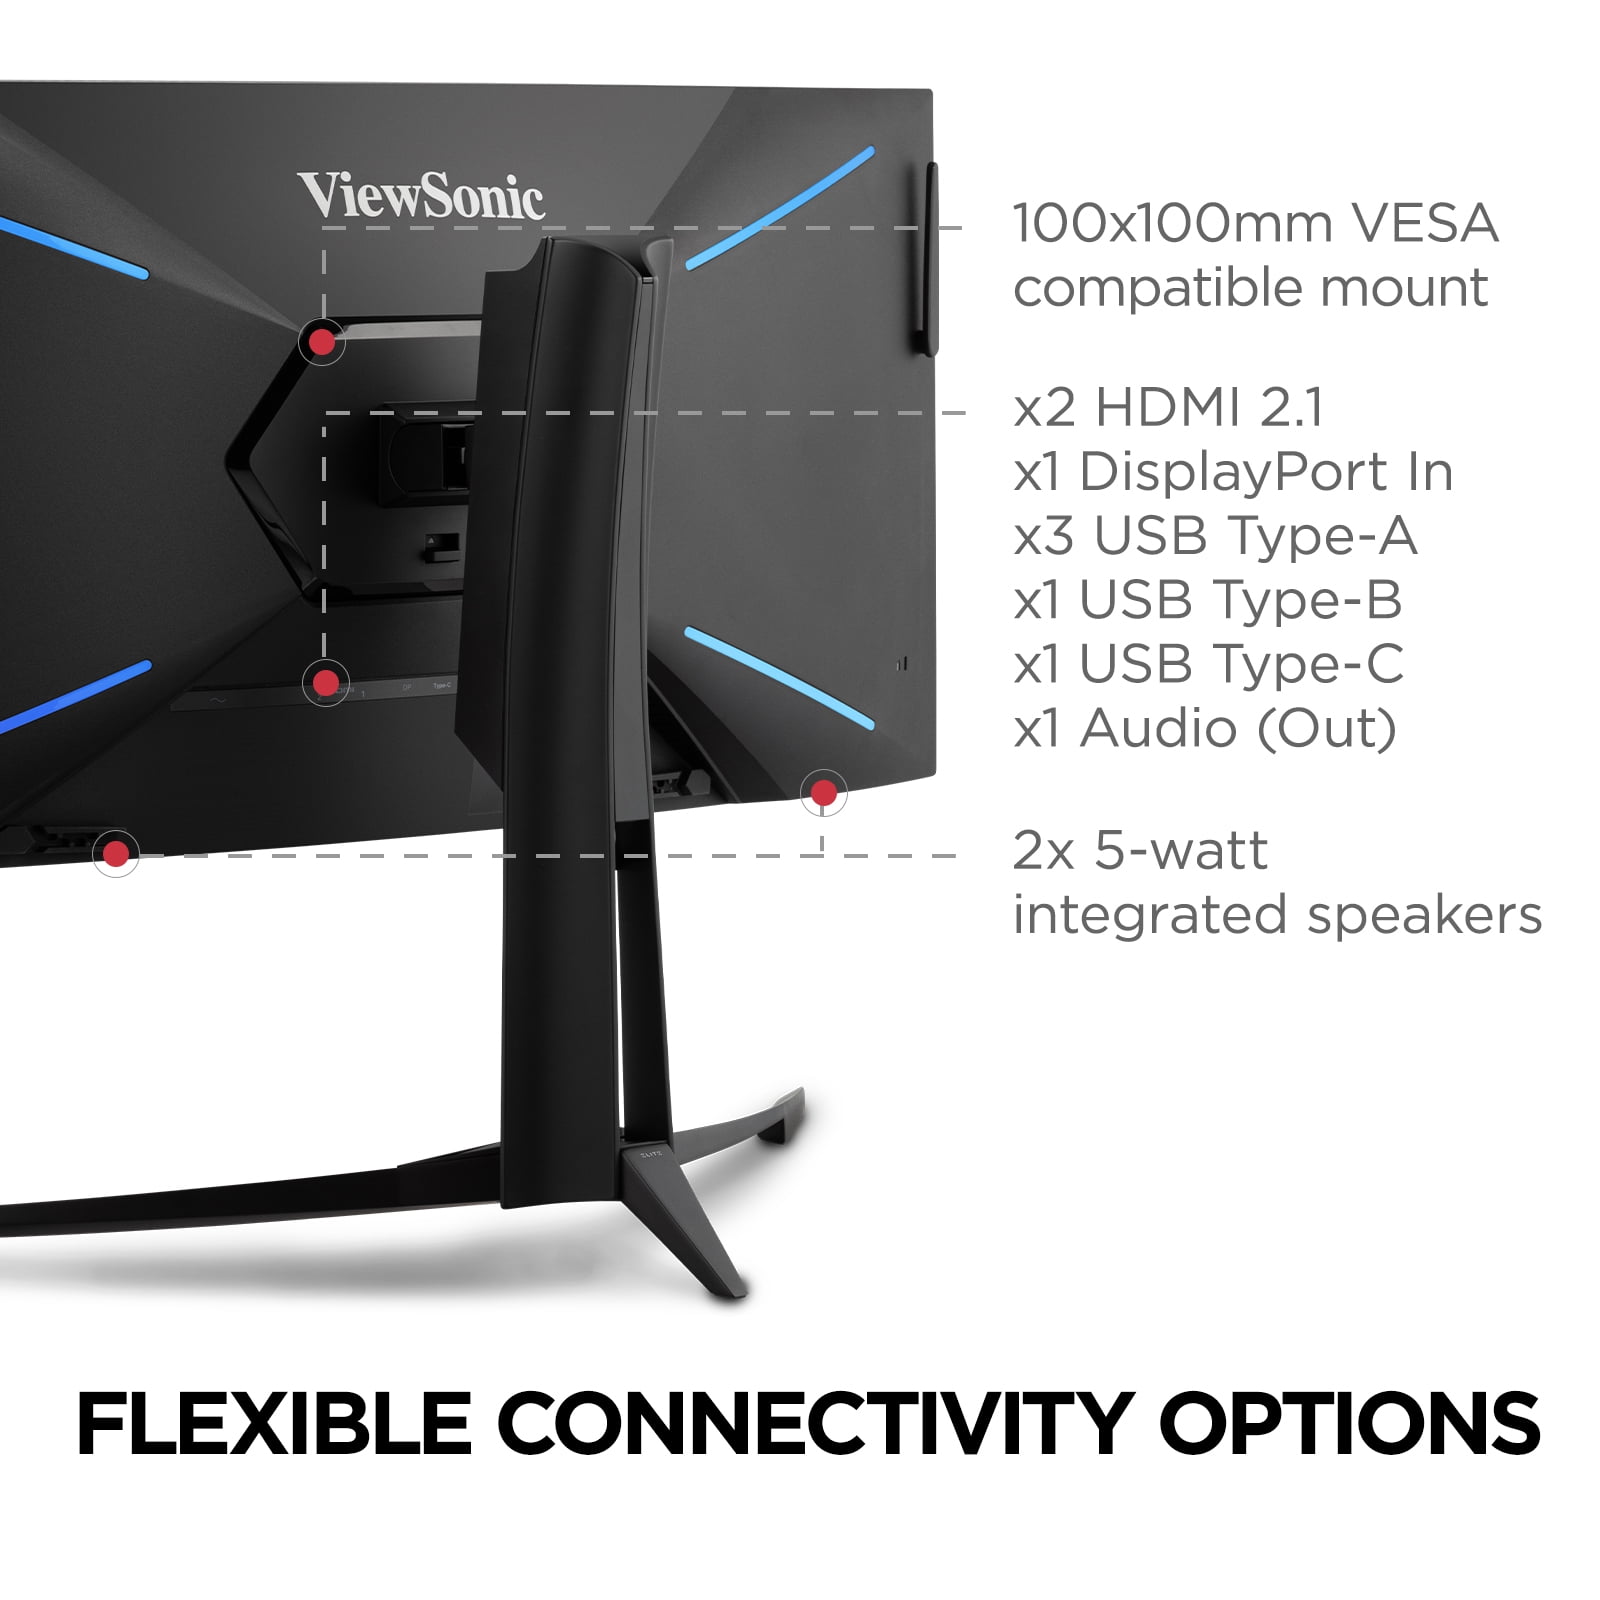 ViewSonic Unveils 34″ Ultra-Wide Curved ELITE Gaming Monitors For Panoramic  Gameplays - The NFA Post